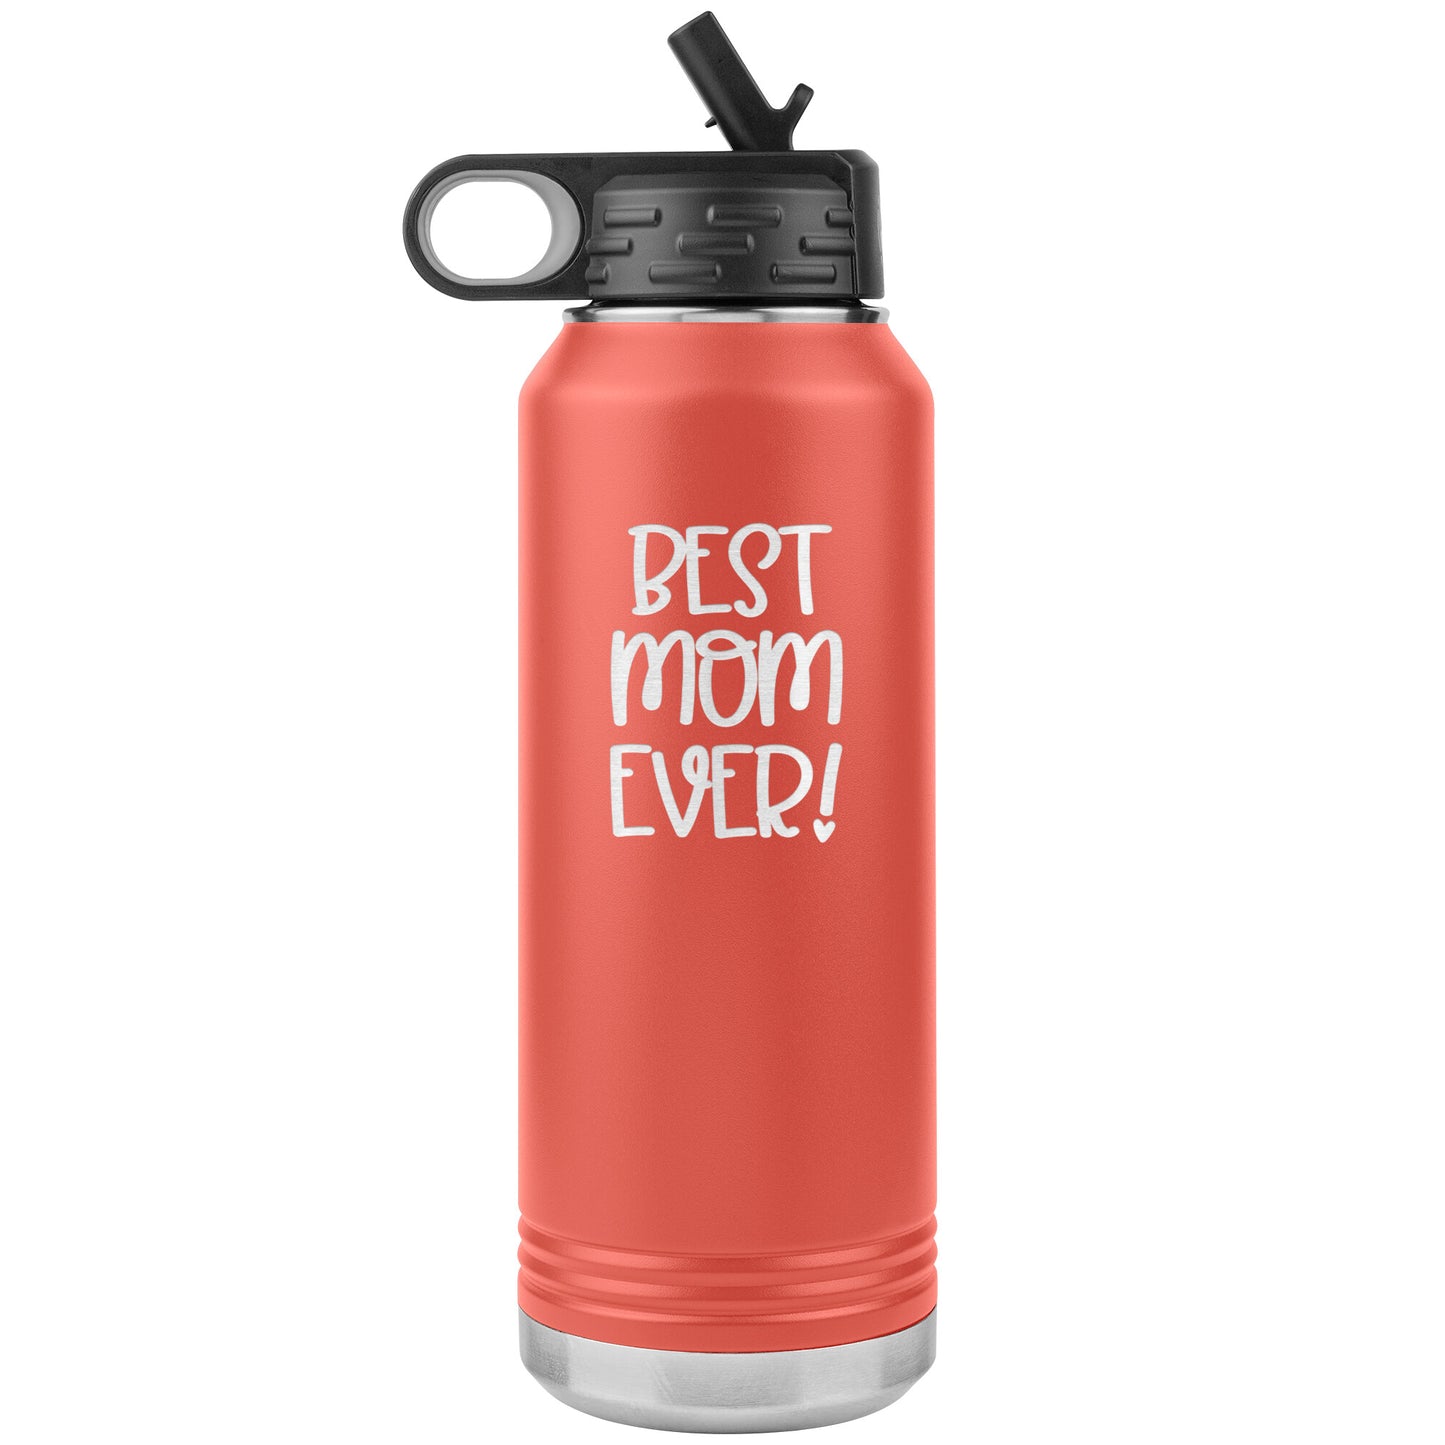 "Best Mom Ever" 32 oz. Reusable Travel Bottle with Flip Top Lid & Built-in Straw